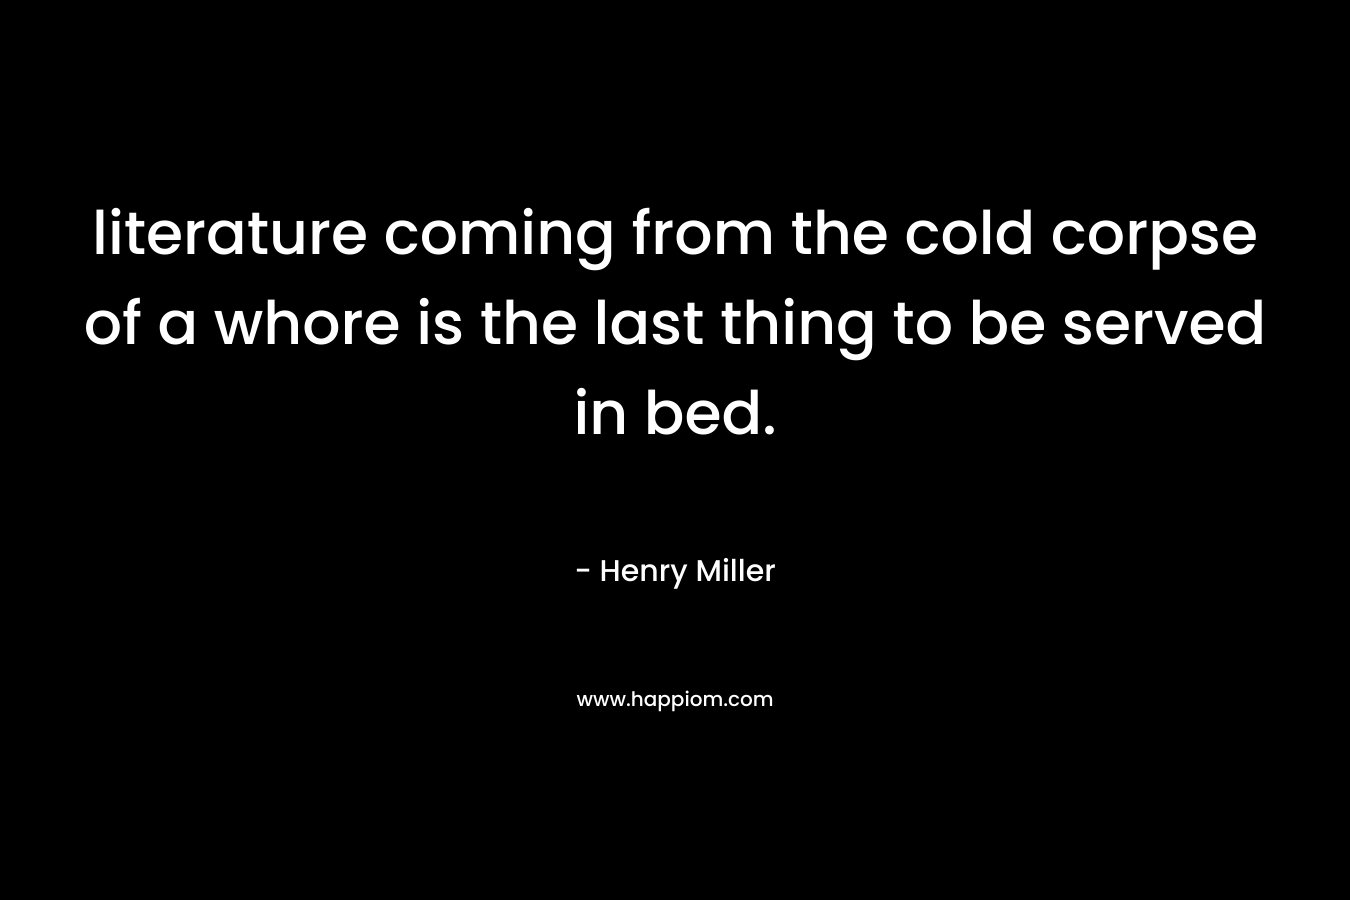 literature coming from the cold corpse of a whore is the last thing to be served in bed.